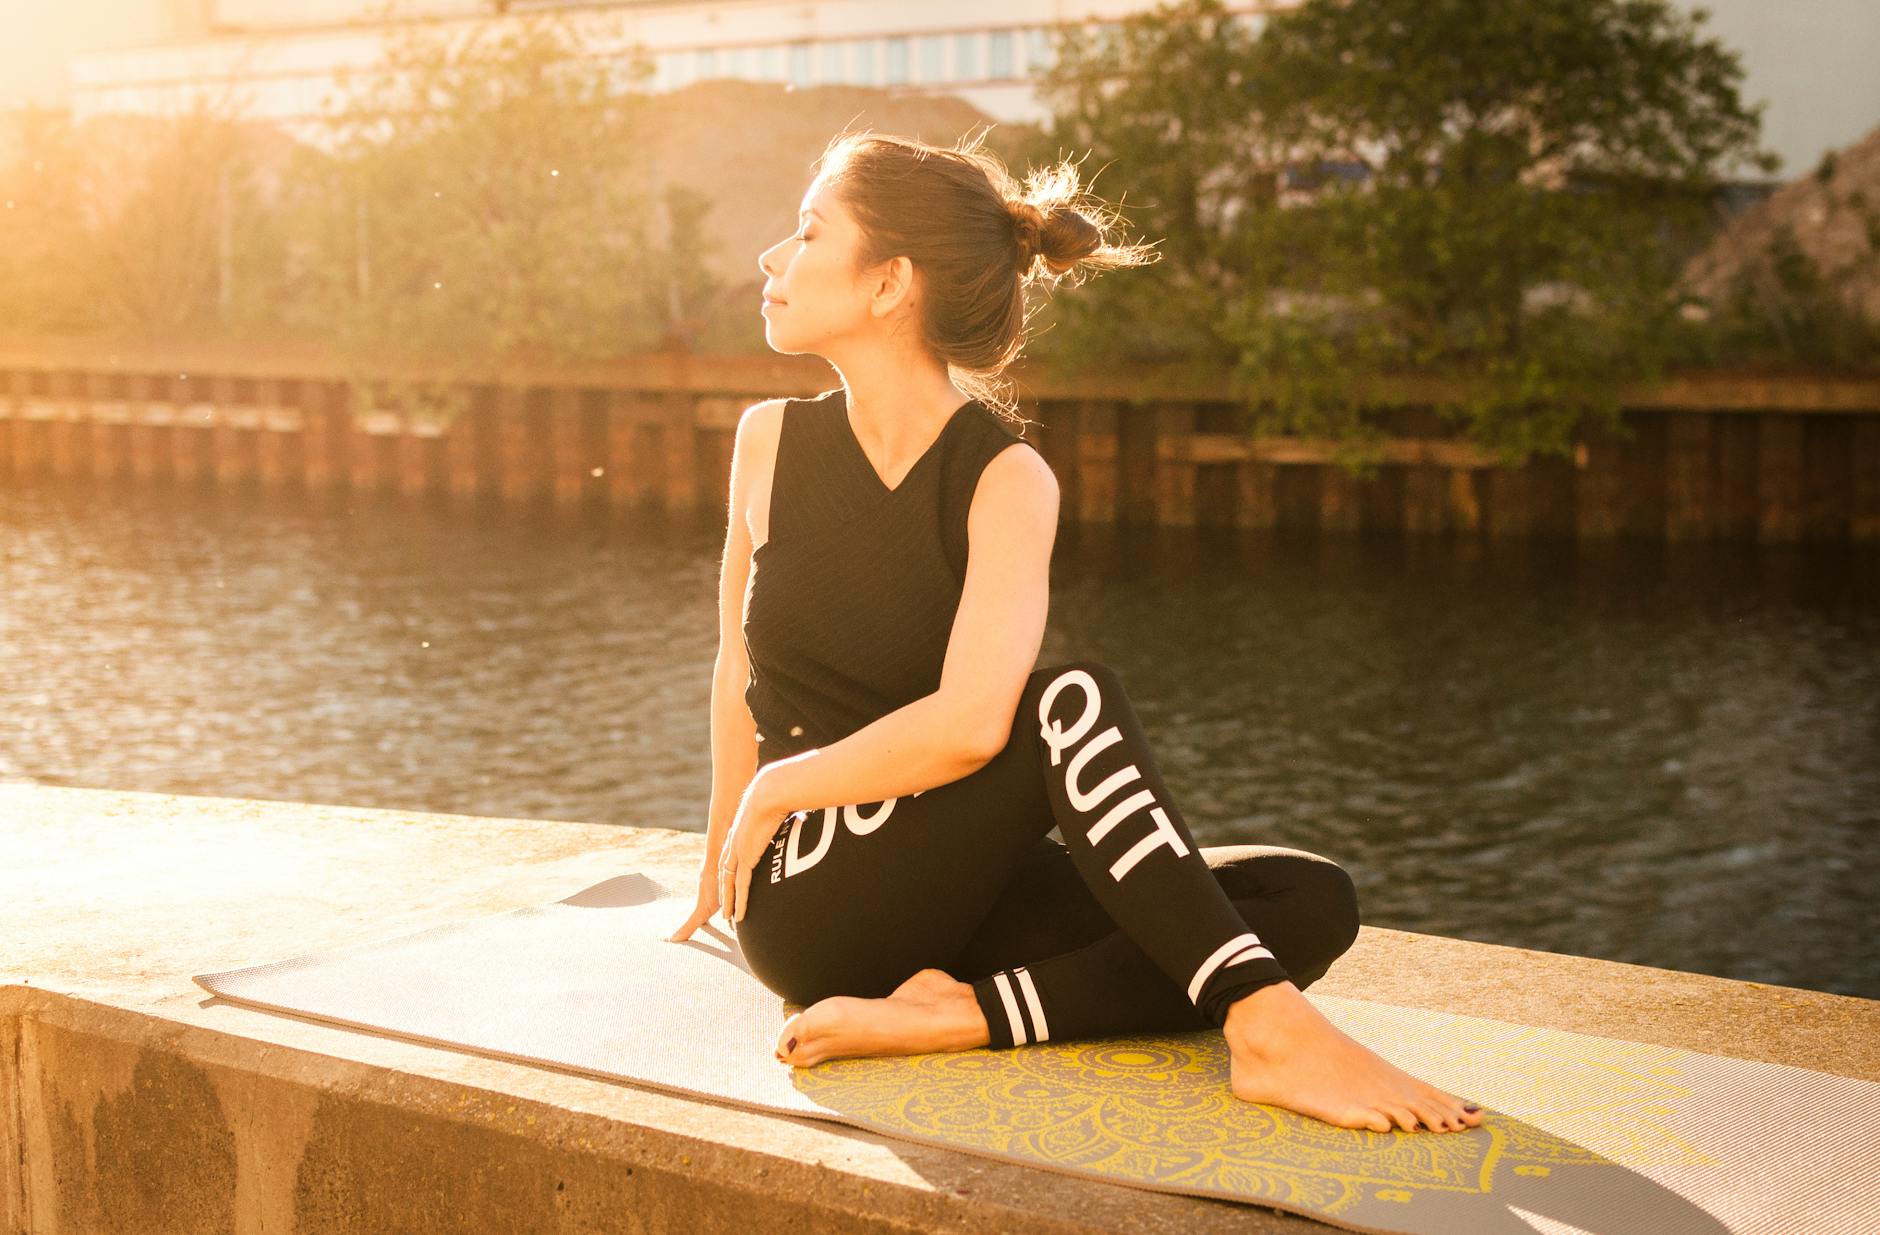 woman wearing black fitness outfit performs yoga near body of water